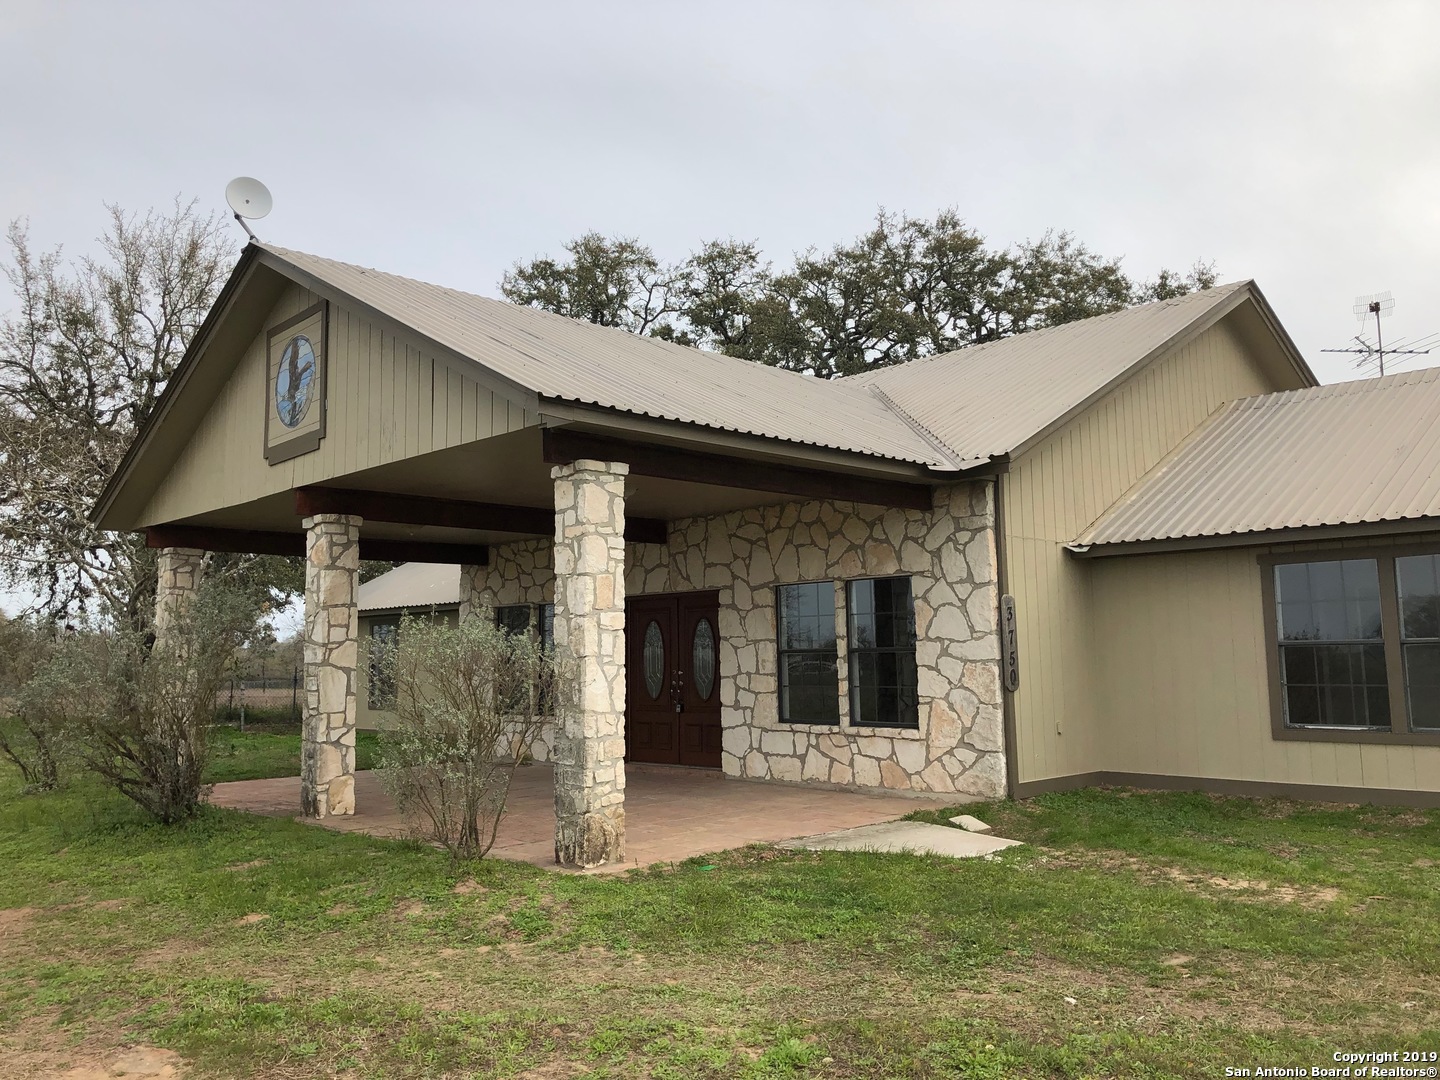 Beautiful 1 story ranch style home. Nice open floor plan with high ceilings located on 1604 and 37. Enjoy mature oaks trees and access to community lake!